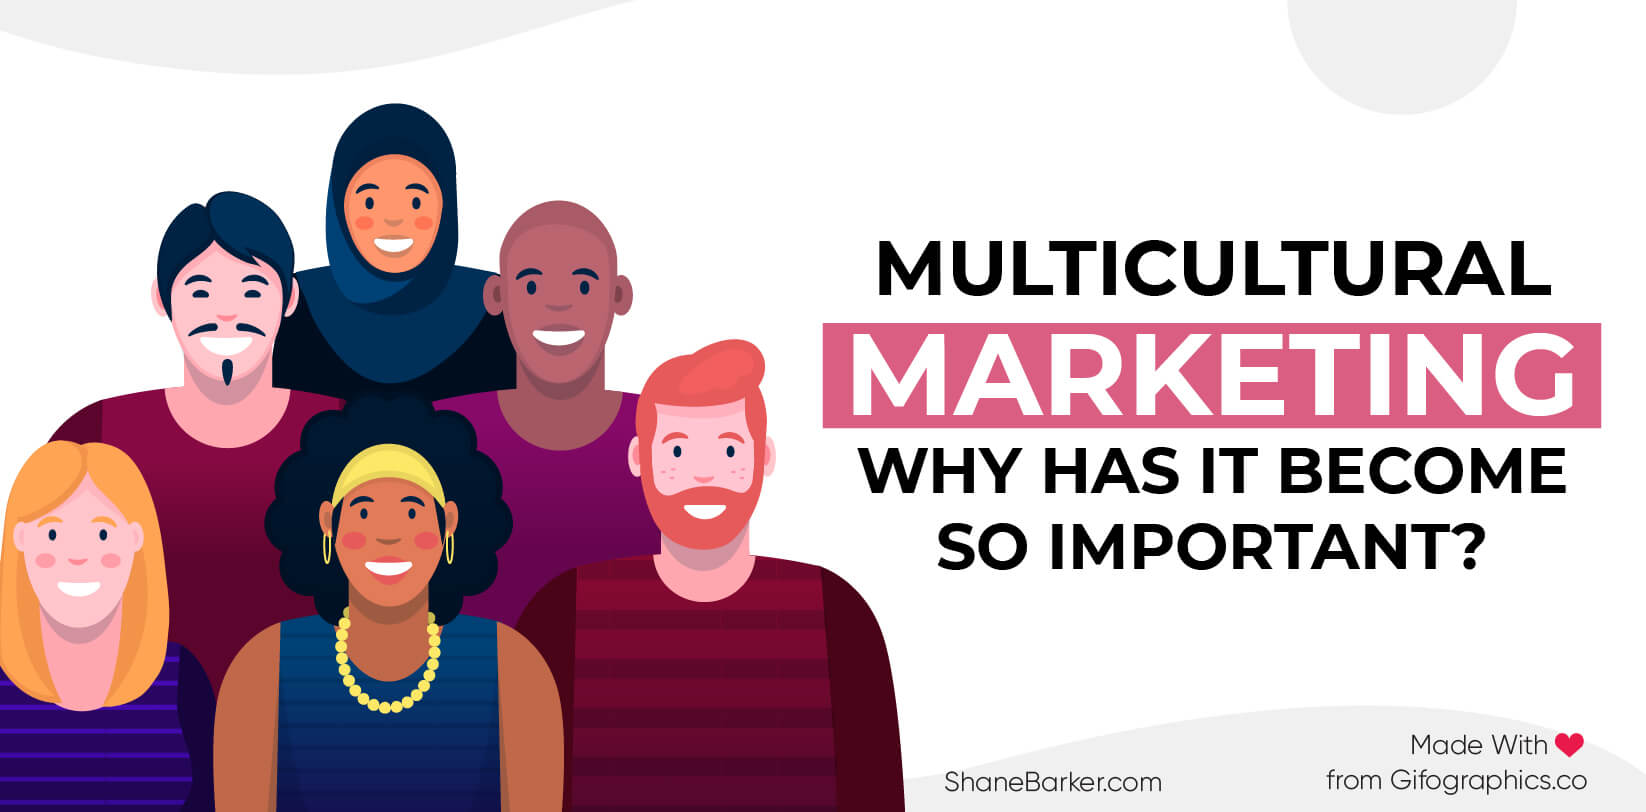 Multicultural Marketing Why Has it Become so Important